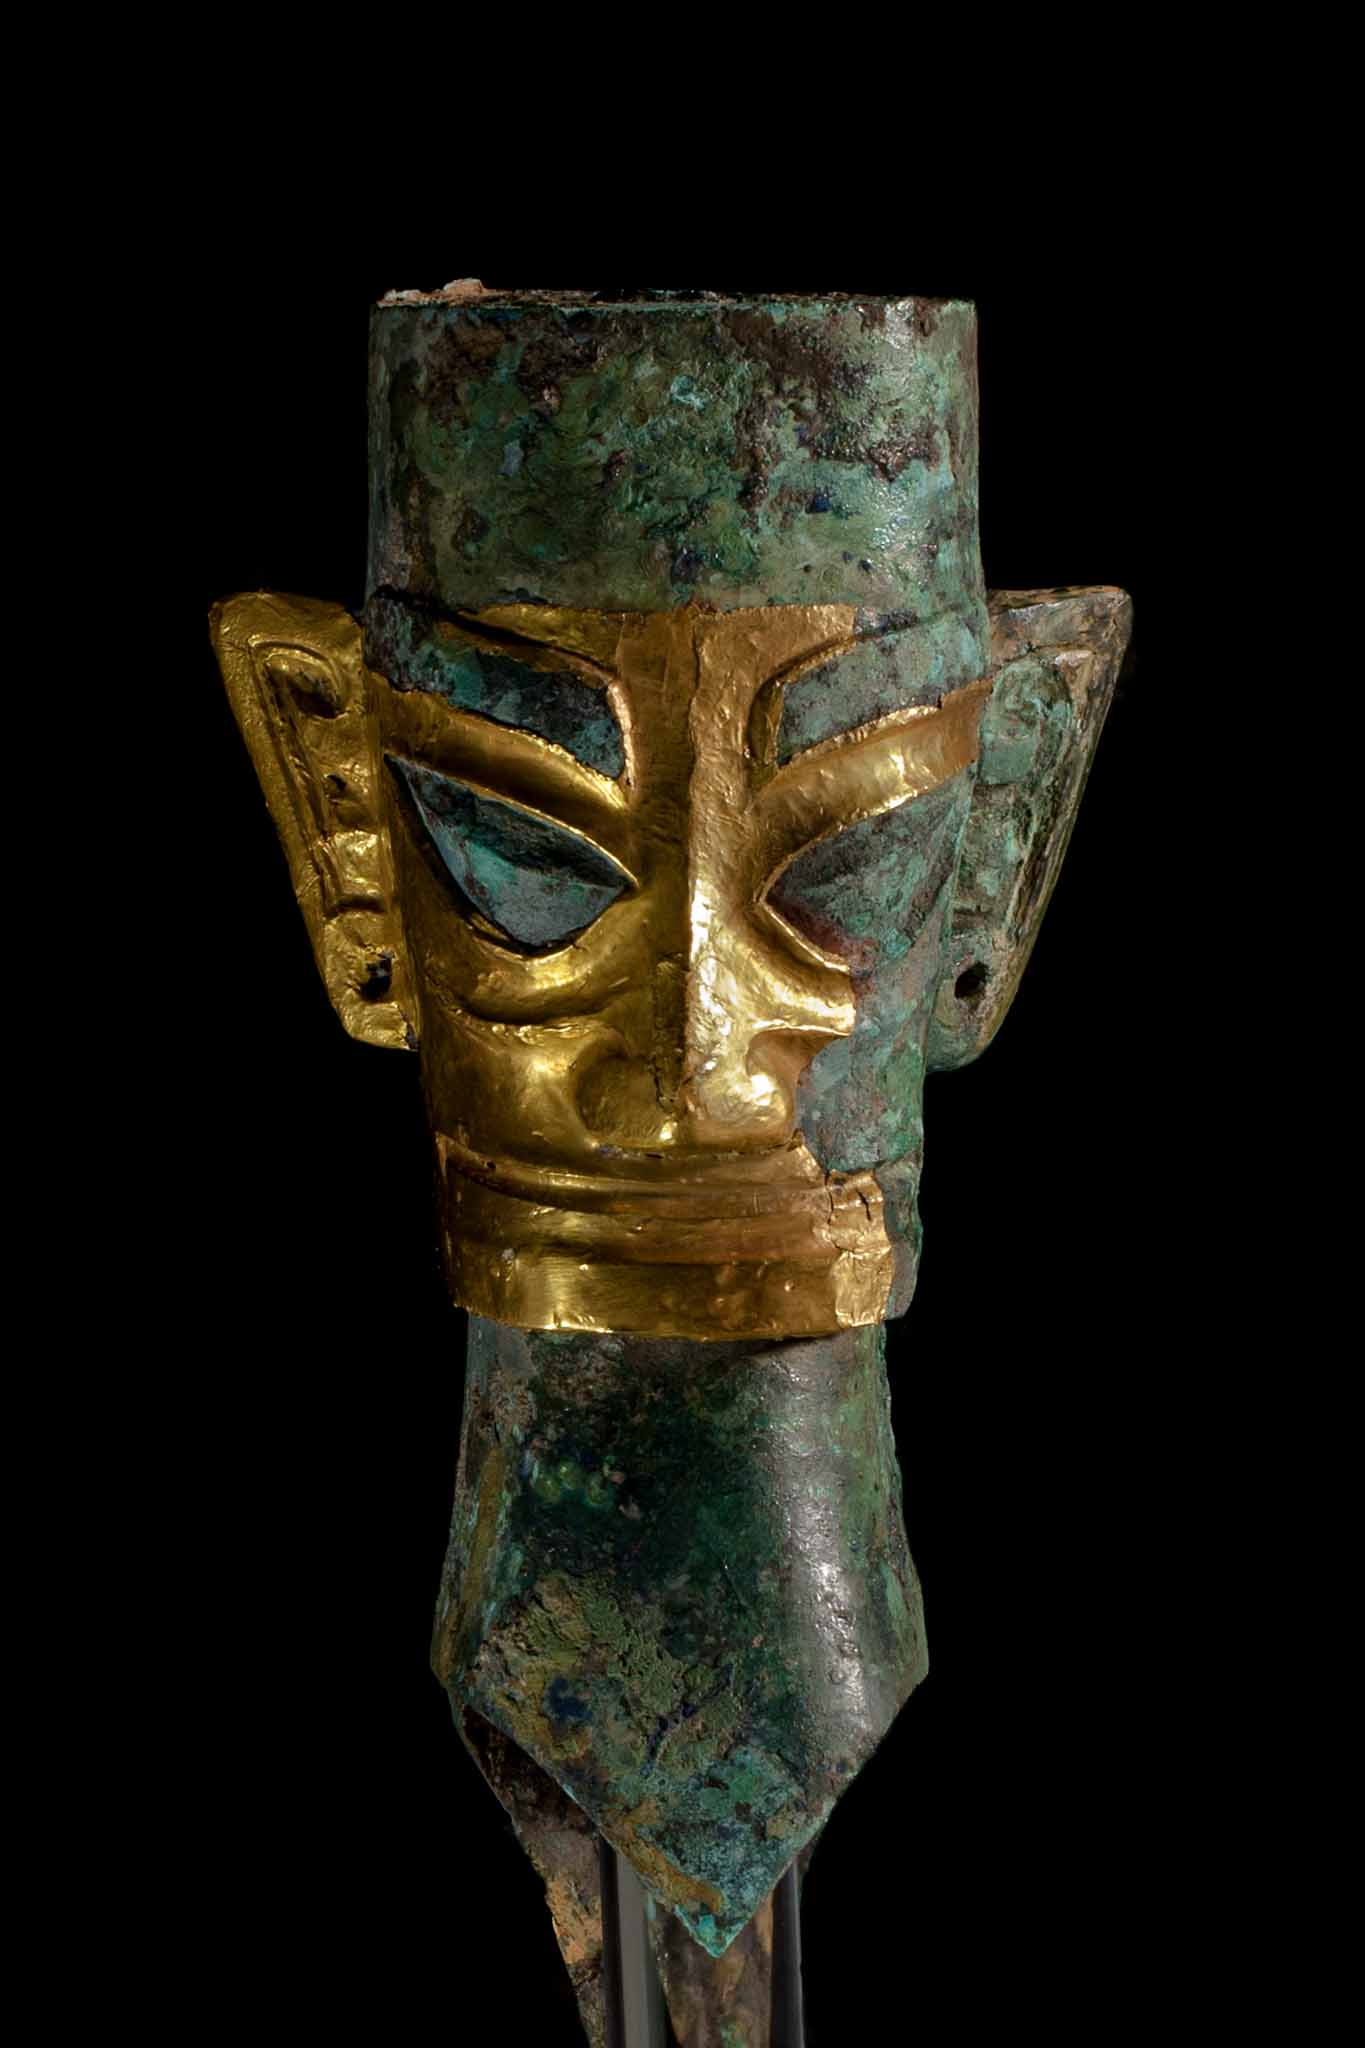 Human Head with Gold Foil Mask II